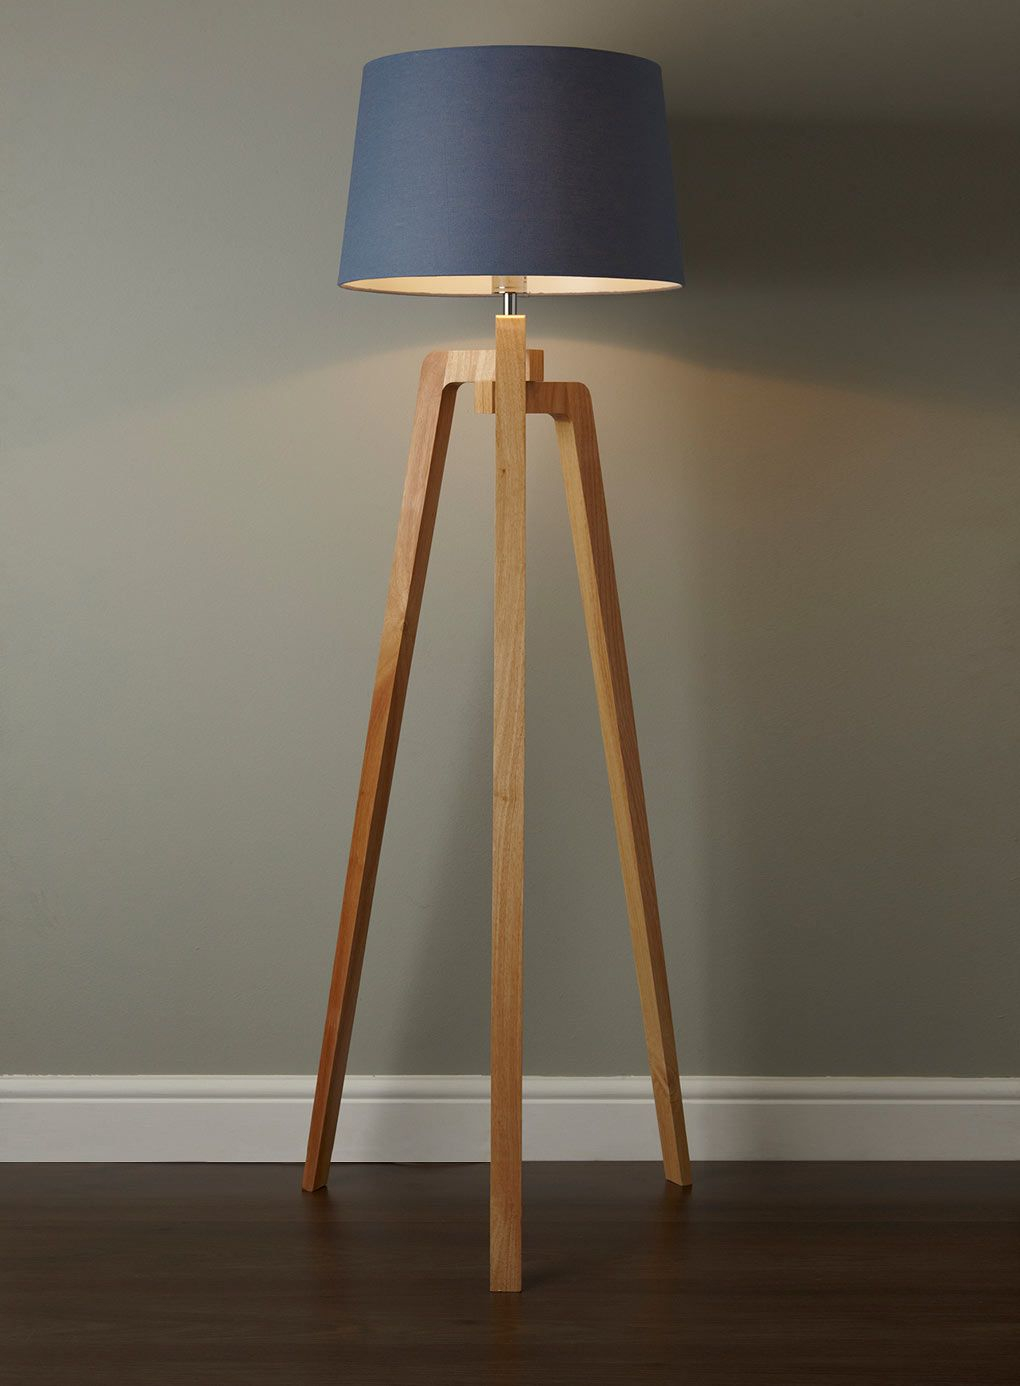 Co Wooden Tripod Floor Lamp Bhs Stehlampe Holz Lampen pertaining to proportions 1020 X 1386